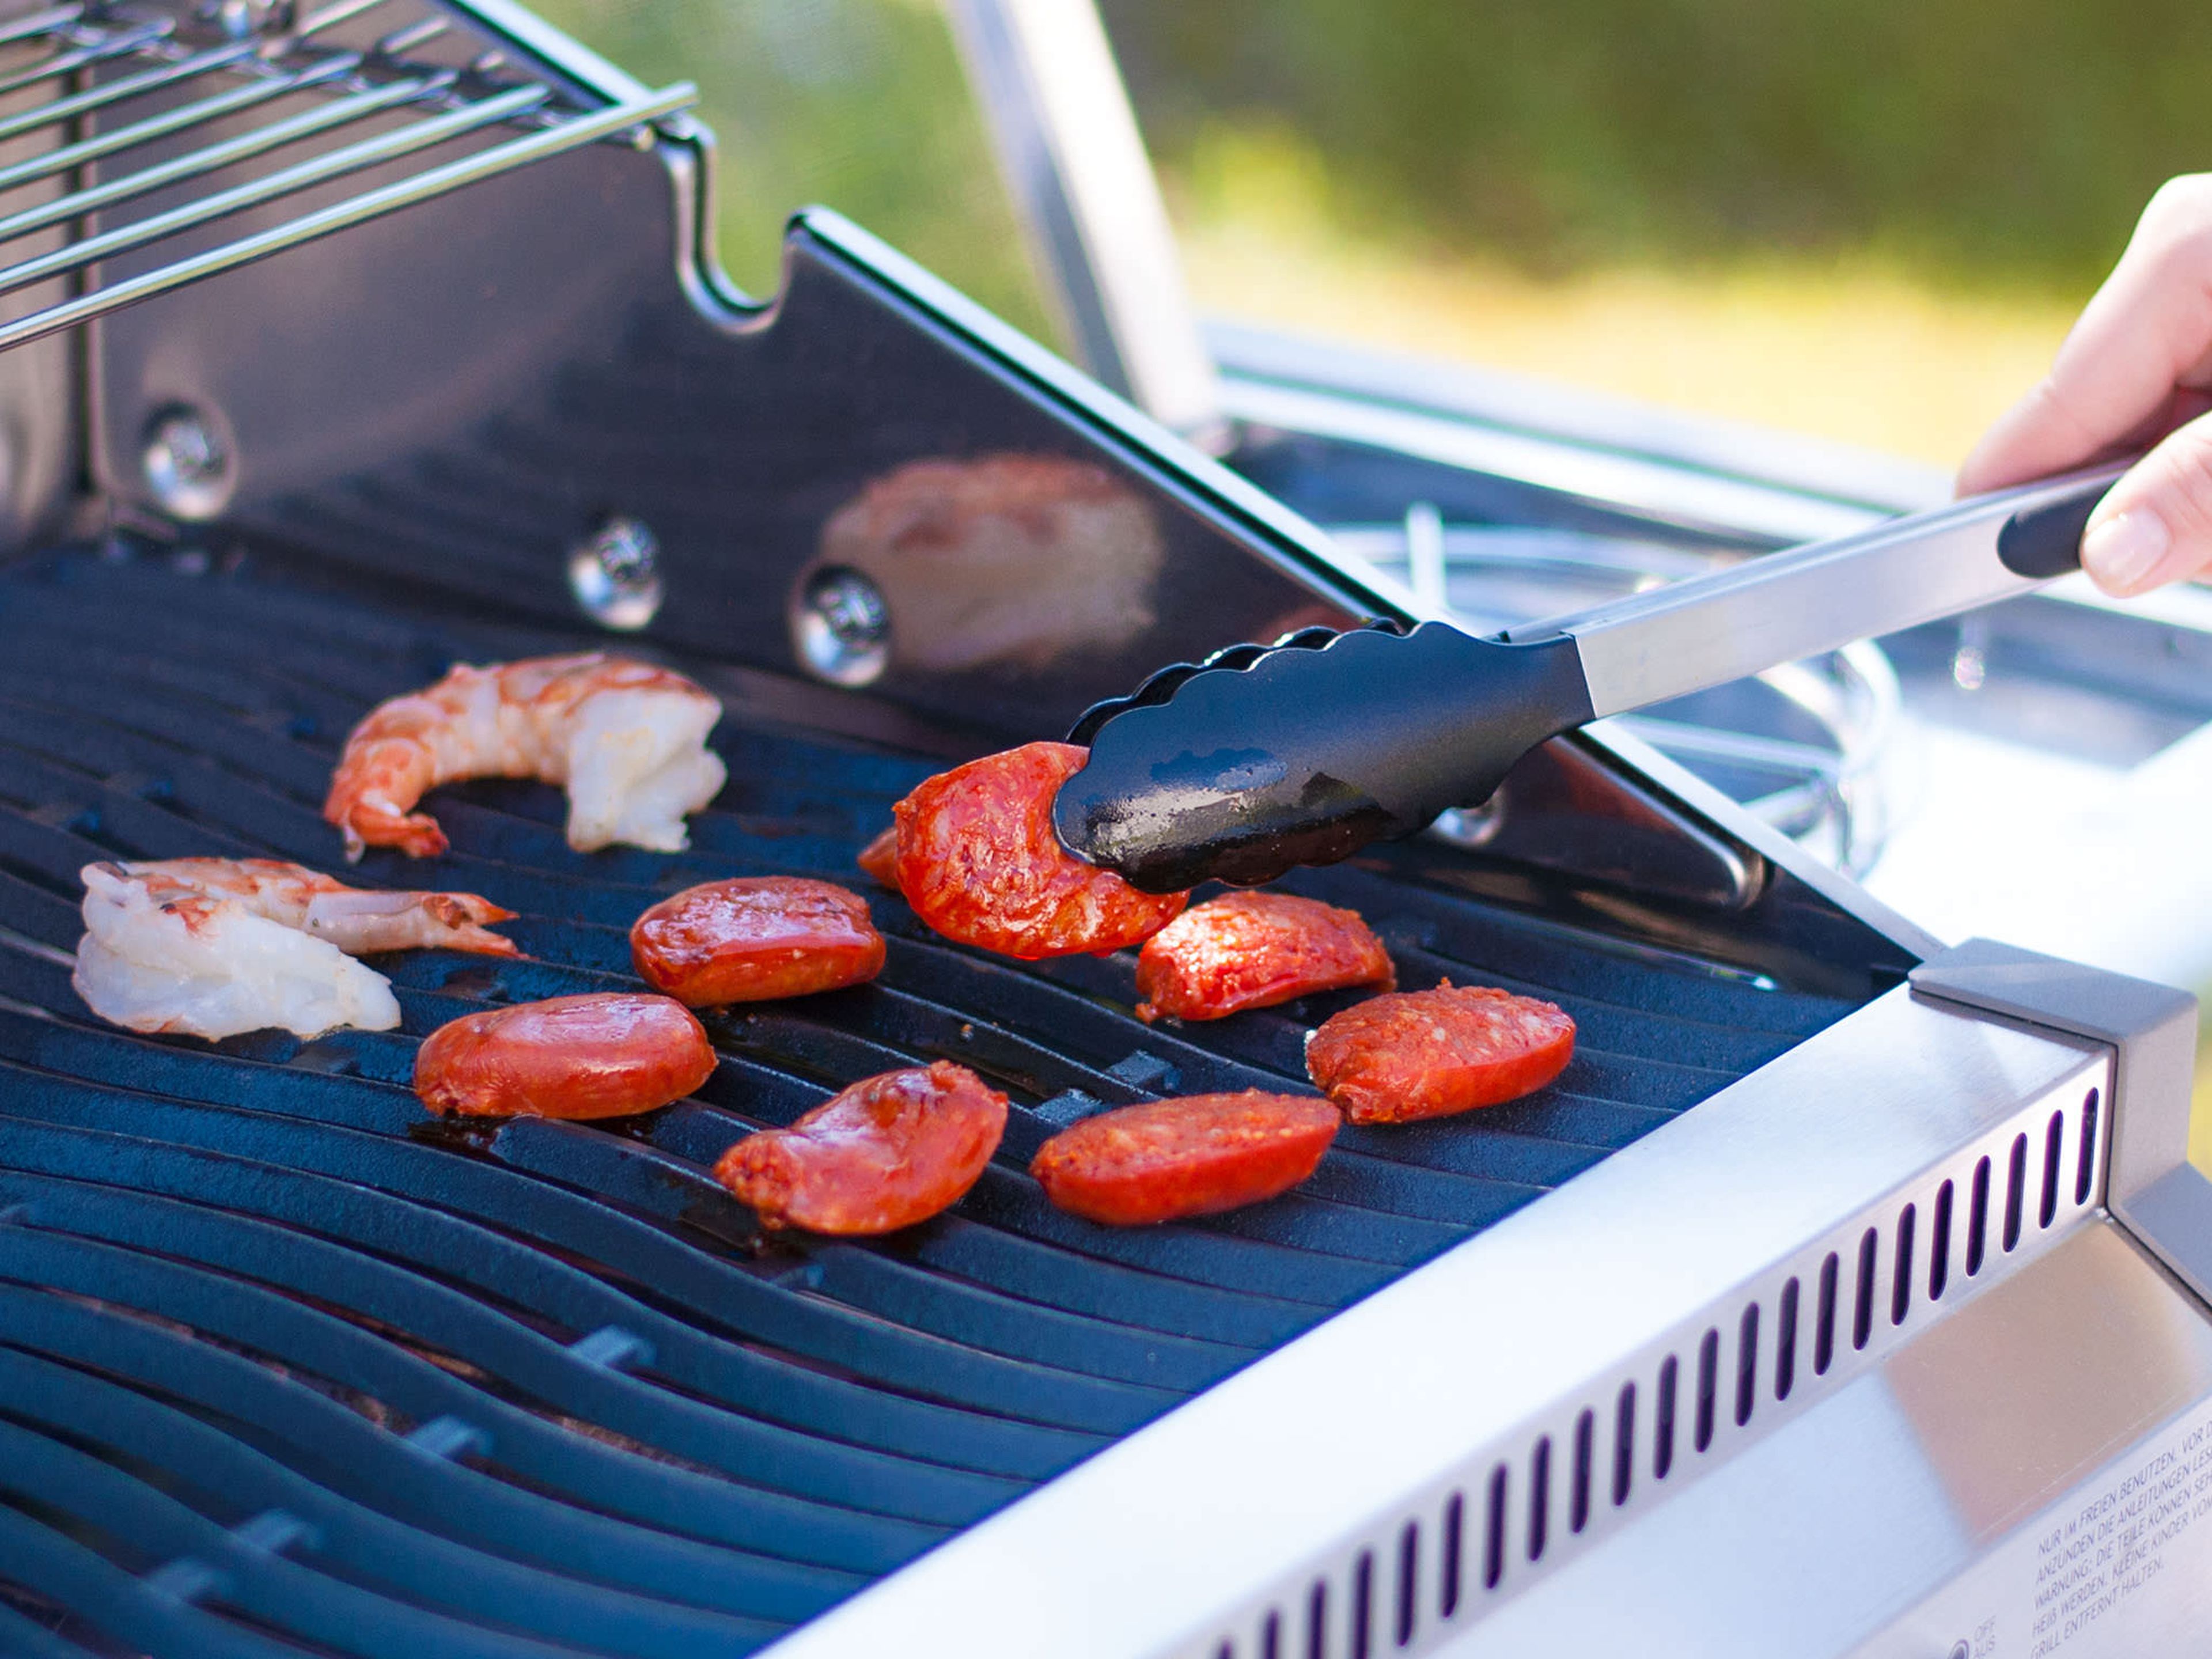 Place bell pepper, chorizo slices and shrimp on grill. Turn approx. after 2 – 3 min. Cover chorizo with some cheese.